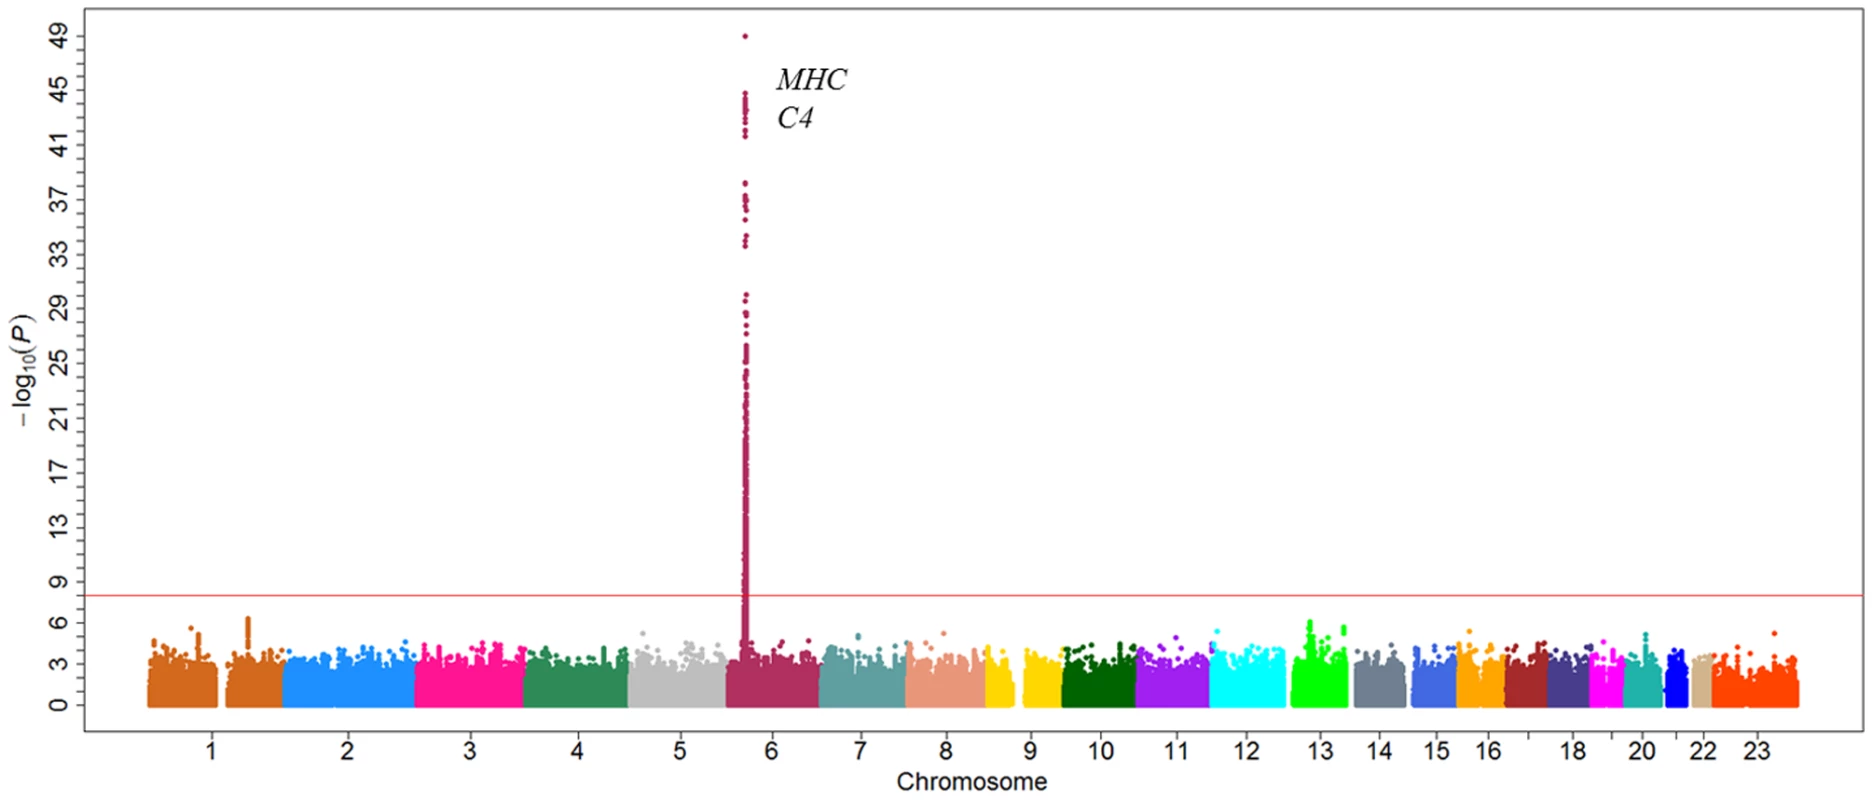 Manhattan plot of genome-wide association analyses for C4 level.